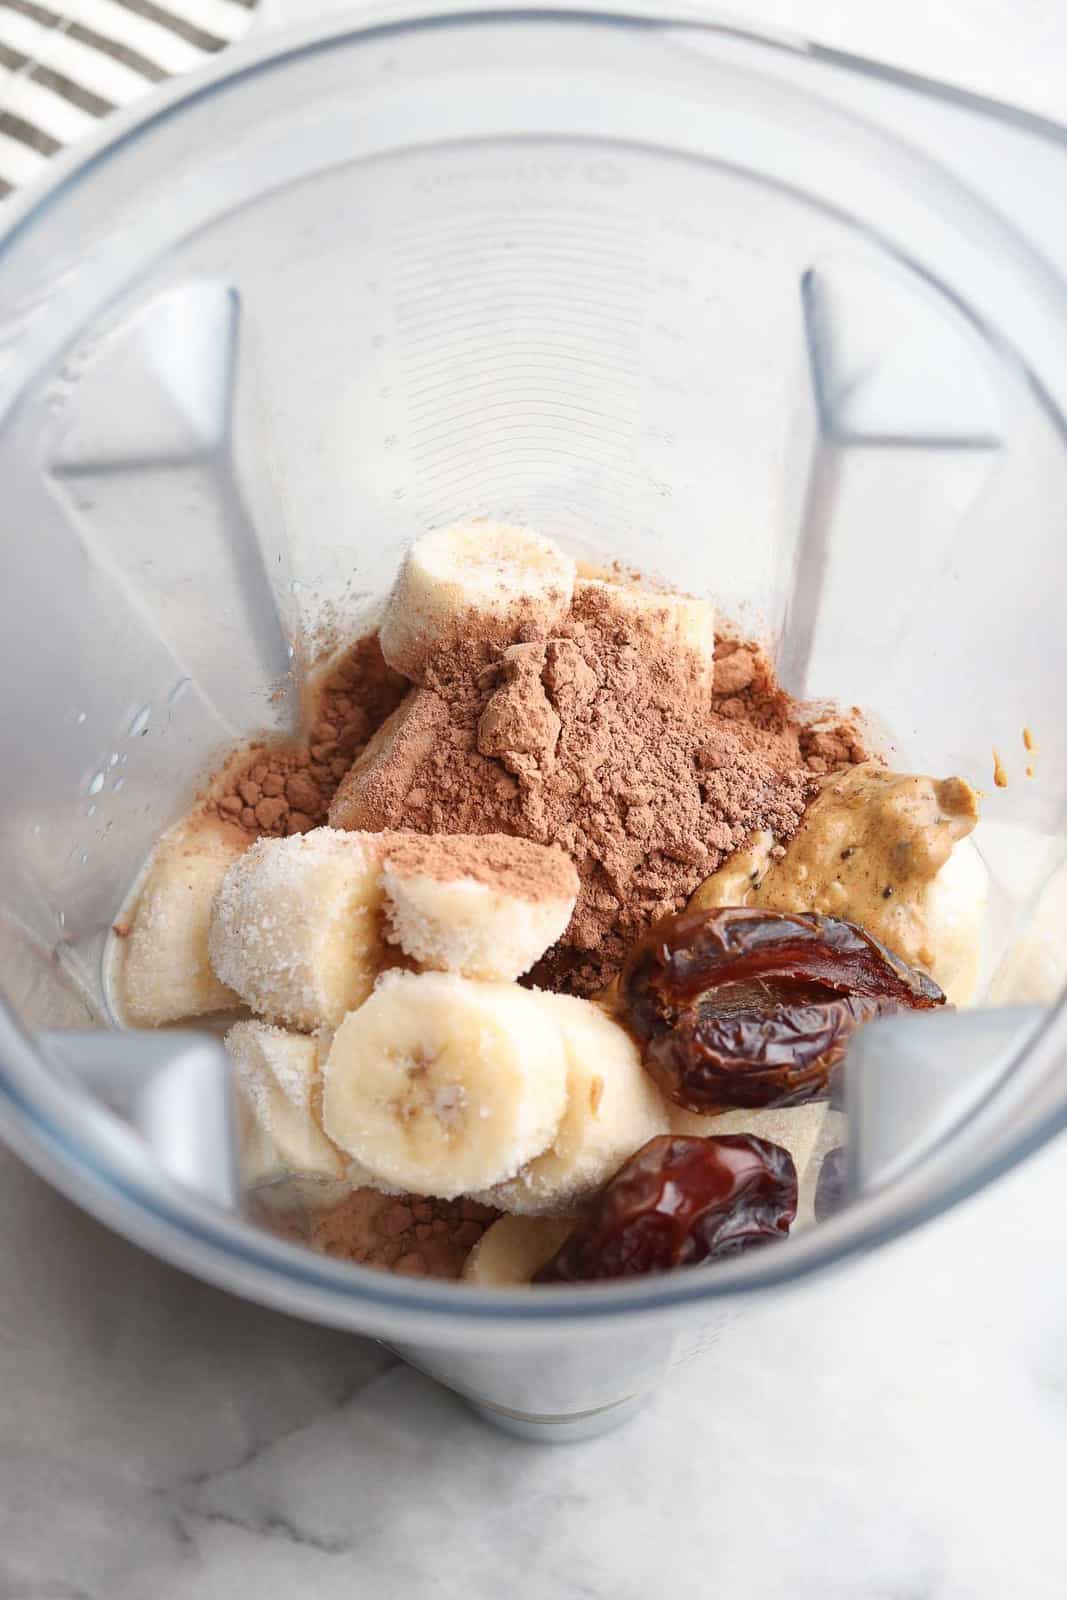 overhead view of blender contents showing banana chunks, cocoa powder, dates, and nut butter